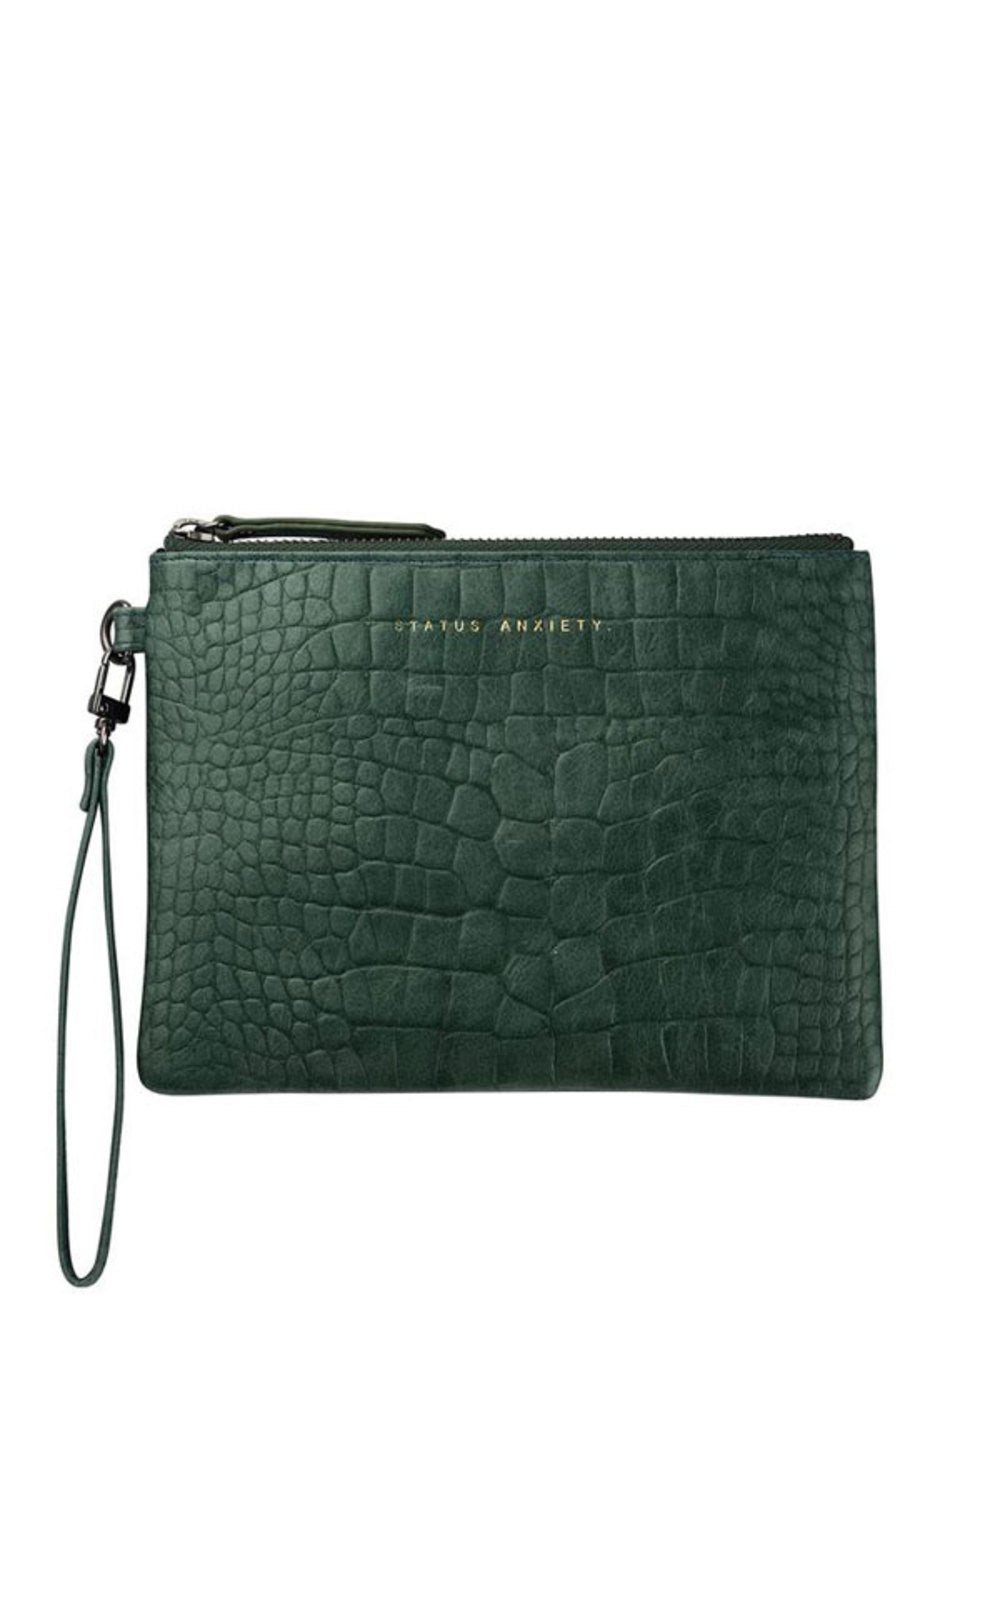 Status Anxiety Fixation Clutch - Teal Croc Emboss